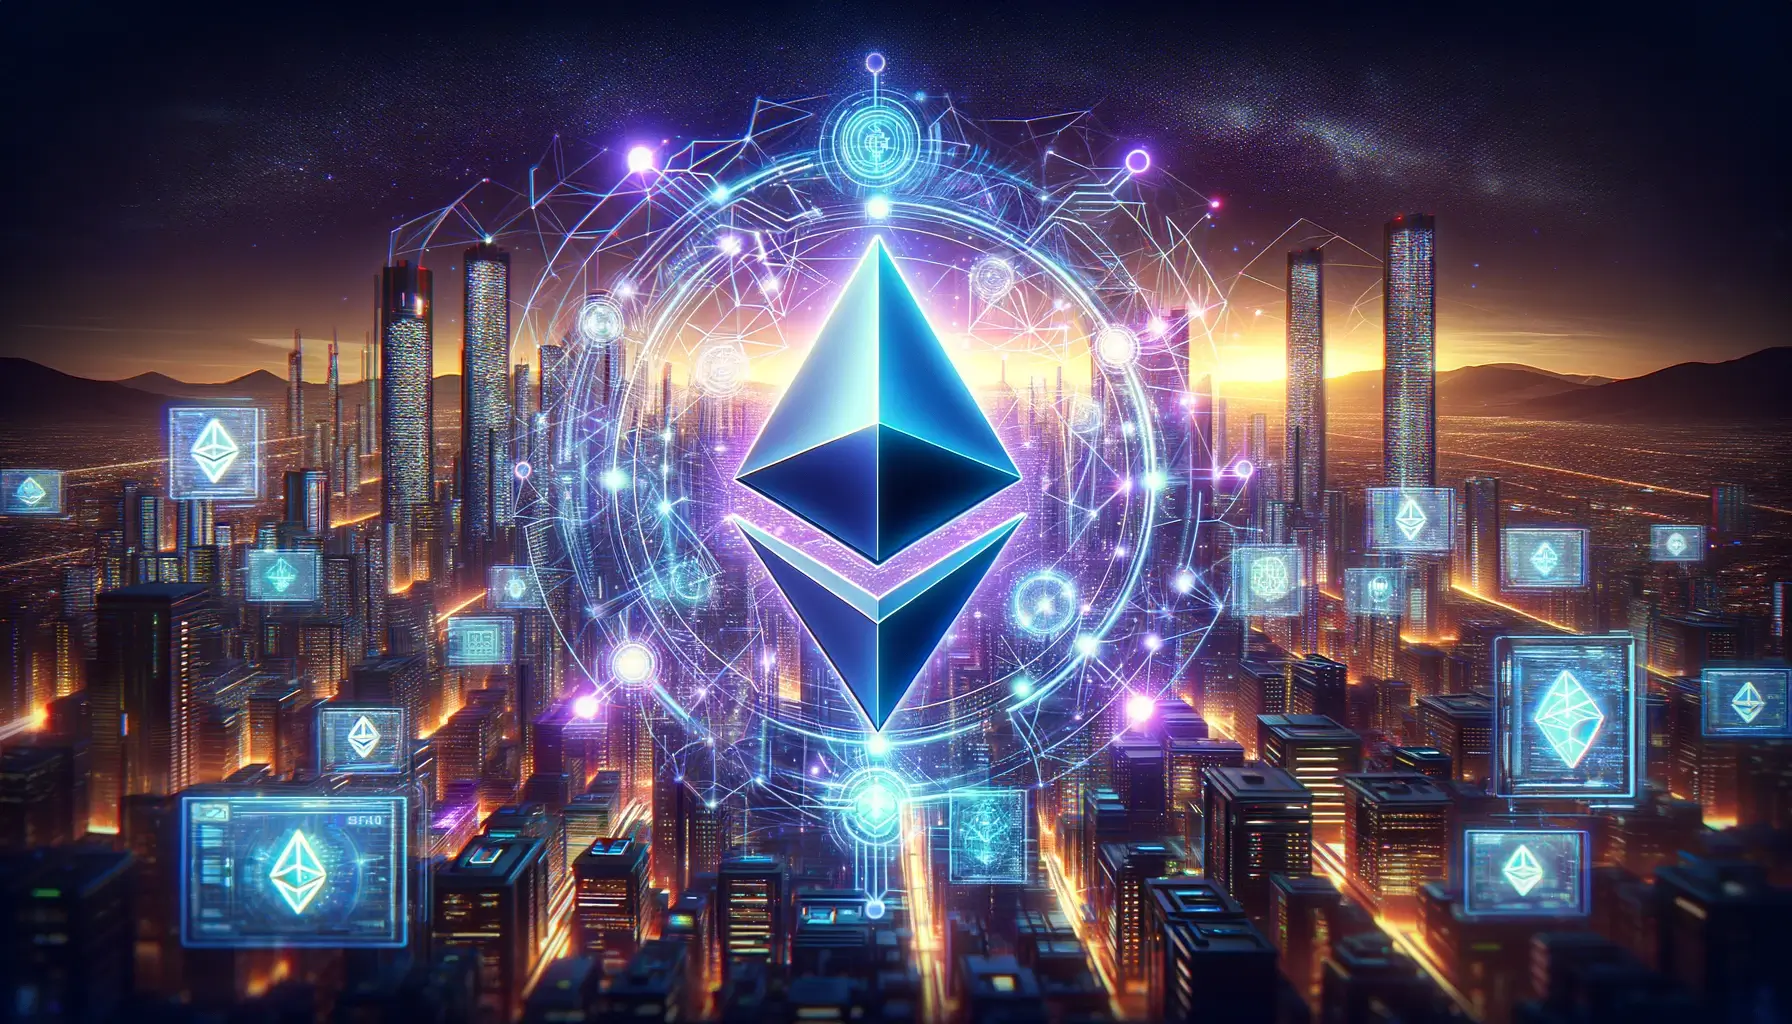 Futuristic Ethereum and blockchain digital landscape with glowing Ethereum logo, interconnected nodes, and high-tech cityscape displaying cryptocurrency symbols.